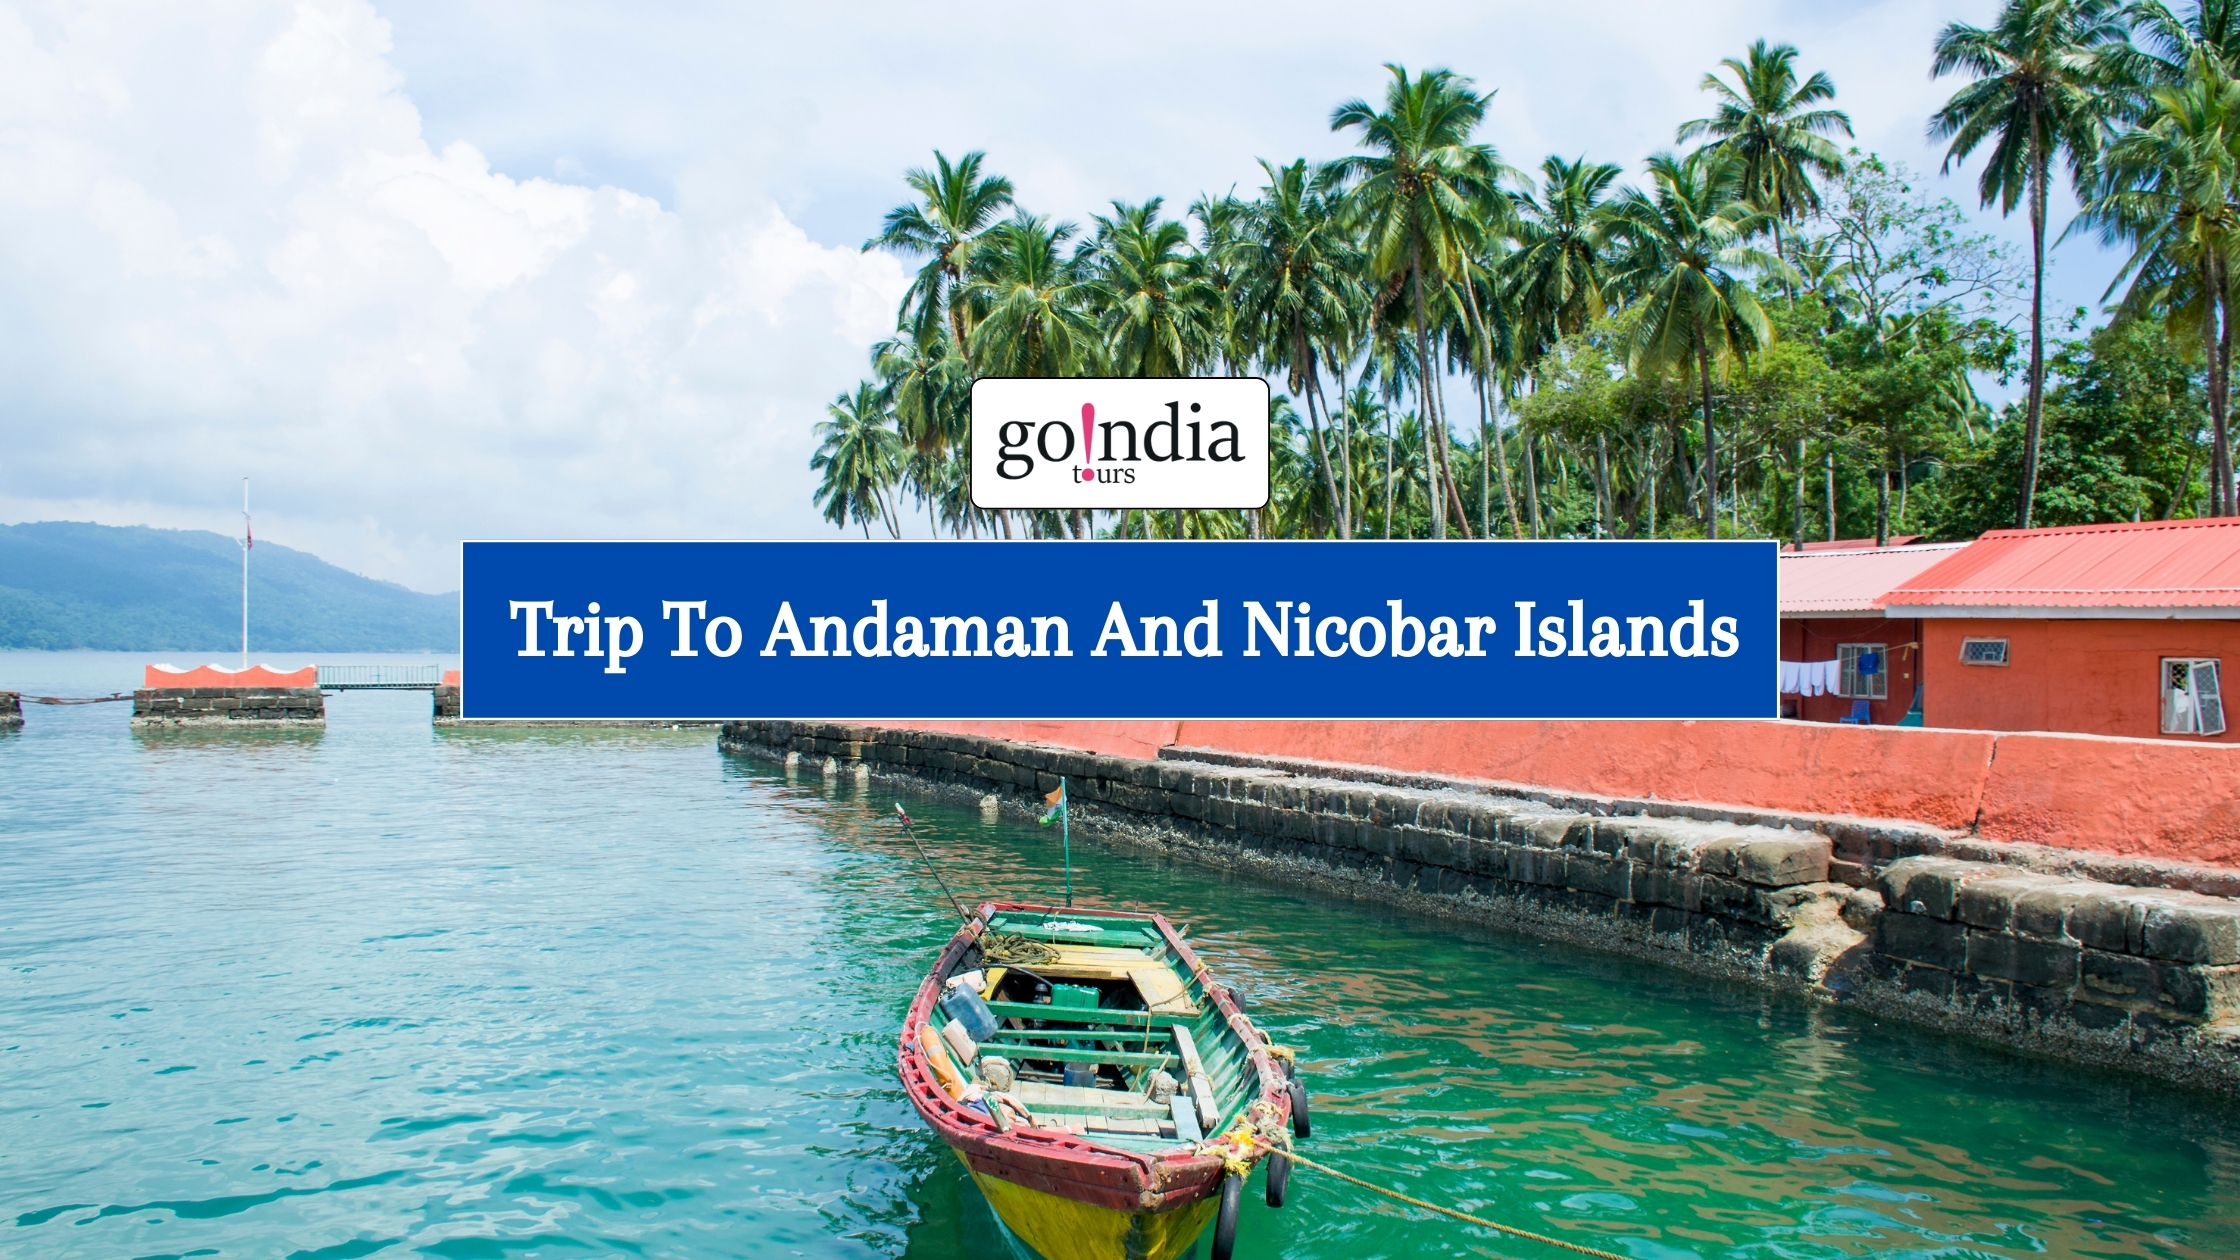 Planning Your Trip To Andaman And Nicobar Islands